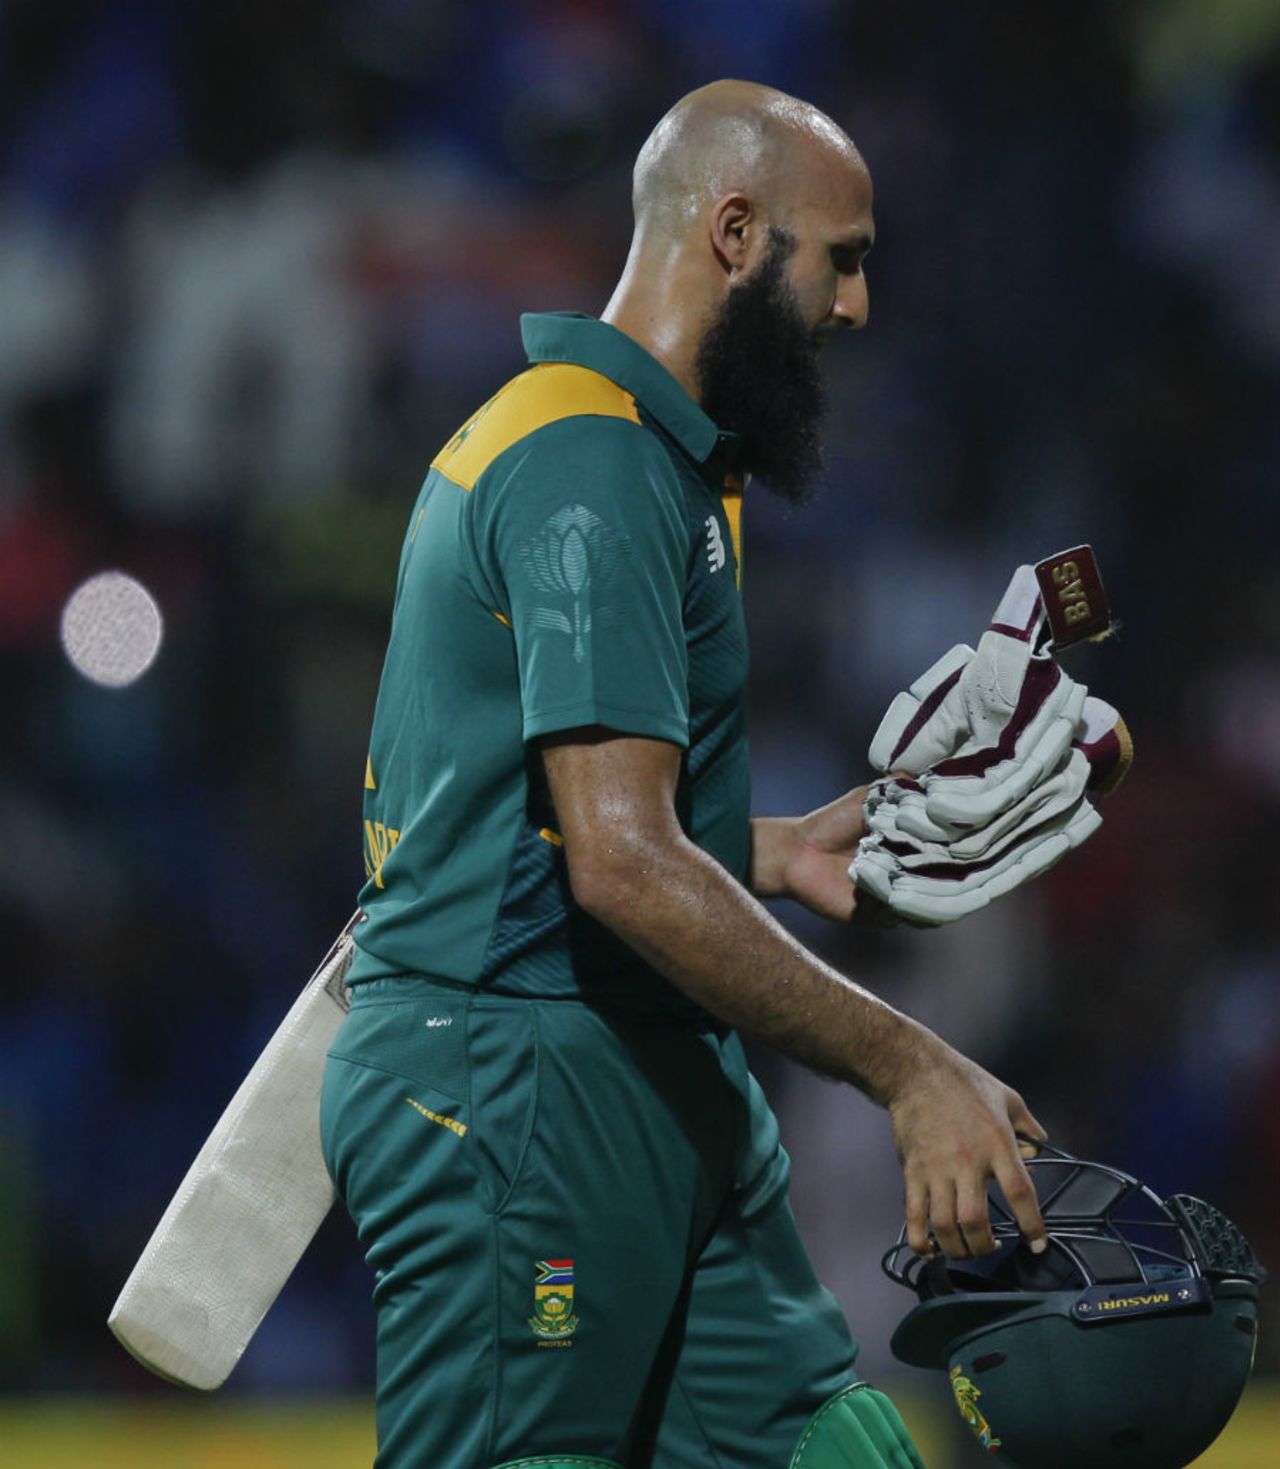 Hashim Amla walks back after being dismissed for 7, India v South Africa, 4th ODI, Chennai, October 22, 2015